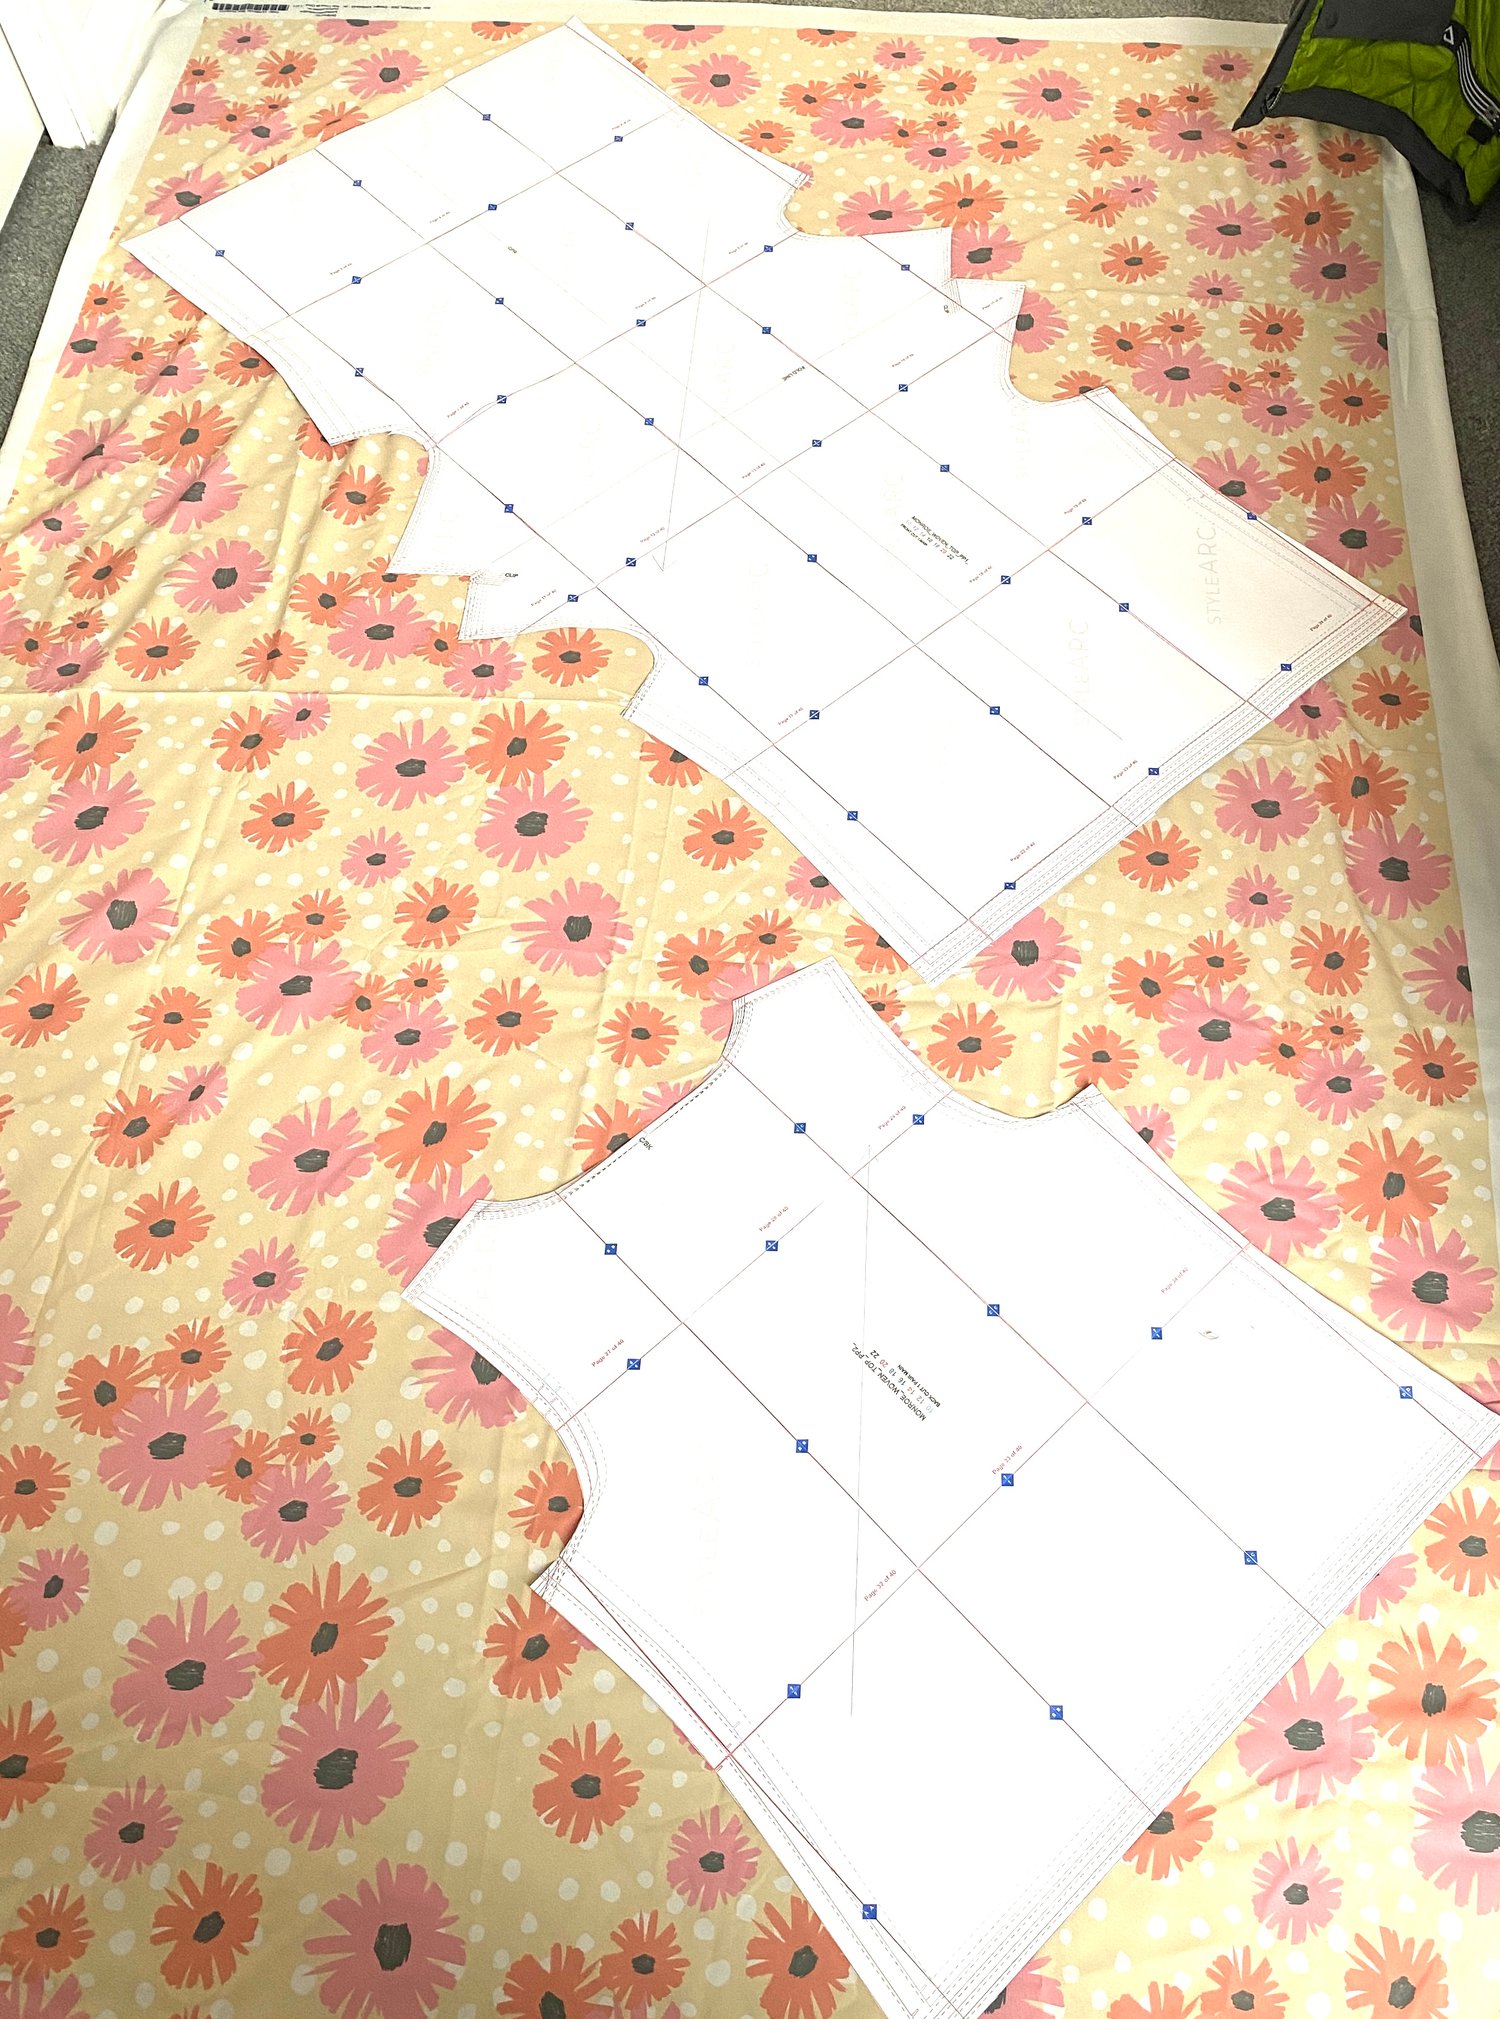 I had to lay the fabric and pattern pieces out on the floor of my bedroom to have enough space! Here is the Poly de Chine Fabric with my design “Blooming Blossoms”, pinned to the pattern pieces and ready to cut.